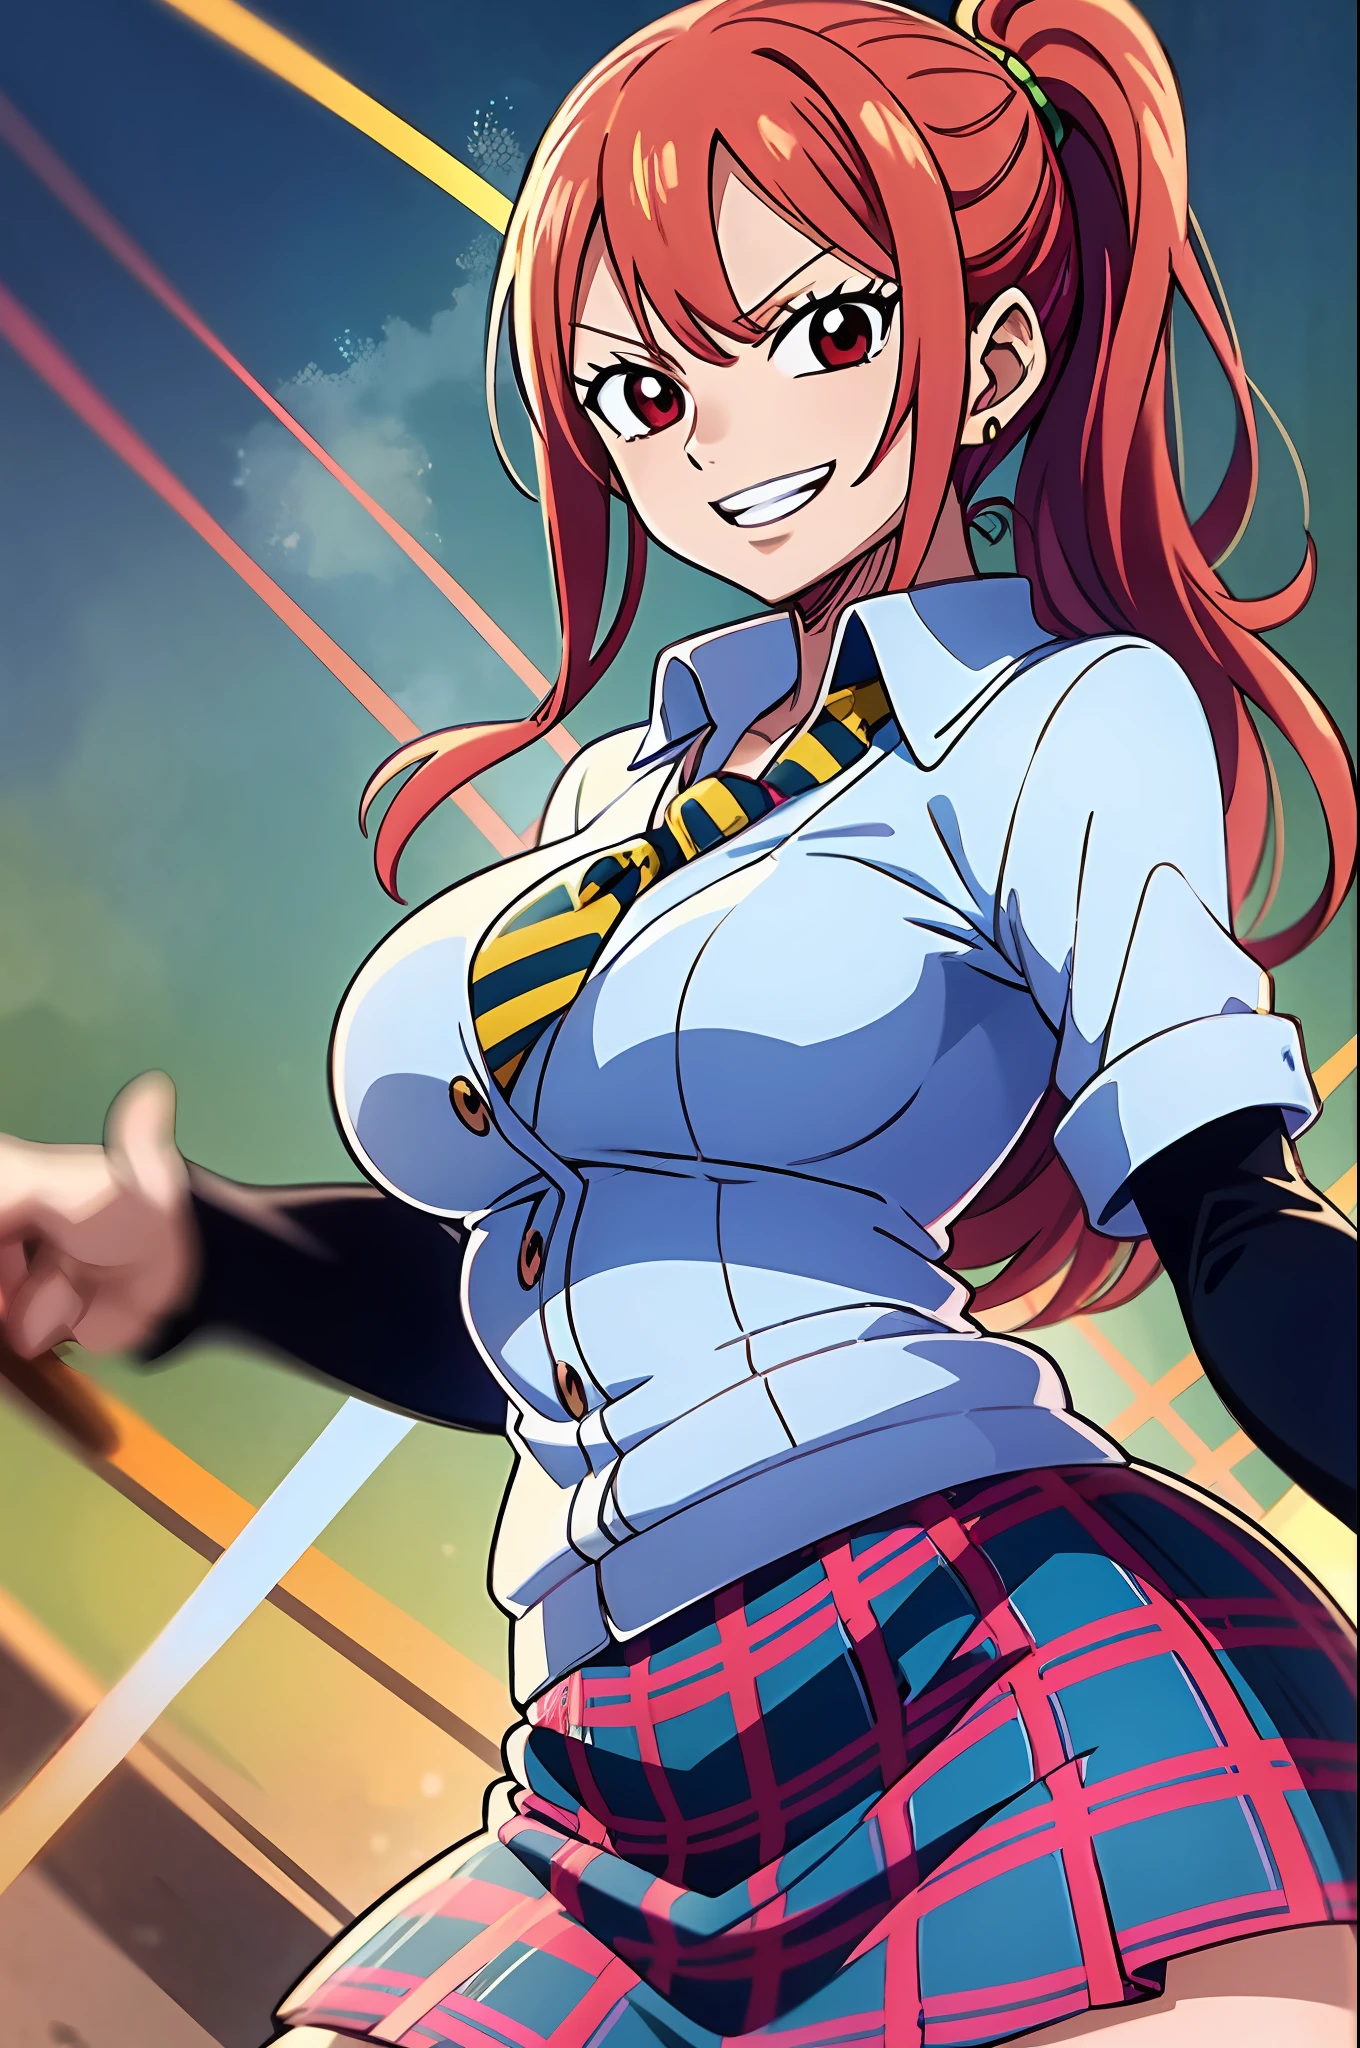 light smile,  attire, white blouse with yellow jacket, green striped tie, red plaid skirt, red eyes and red hair in a twin ponytail, (style of one piece and fairy tail anime), (illustrated by Eiichiro Oda and Hiro Mashima), (style mixing), Lucy Heartfilia, Nami